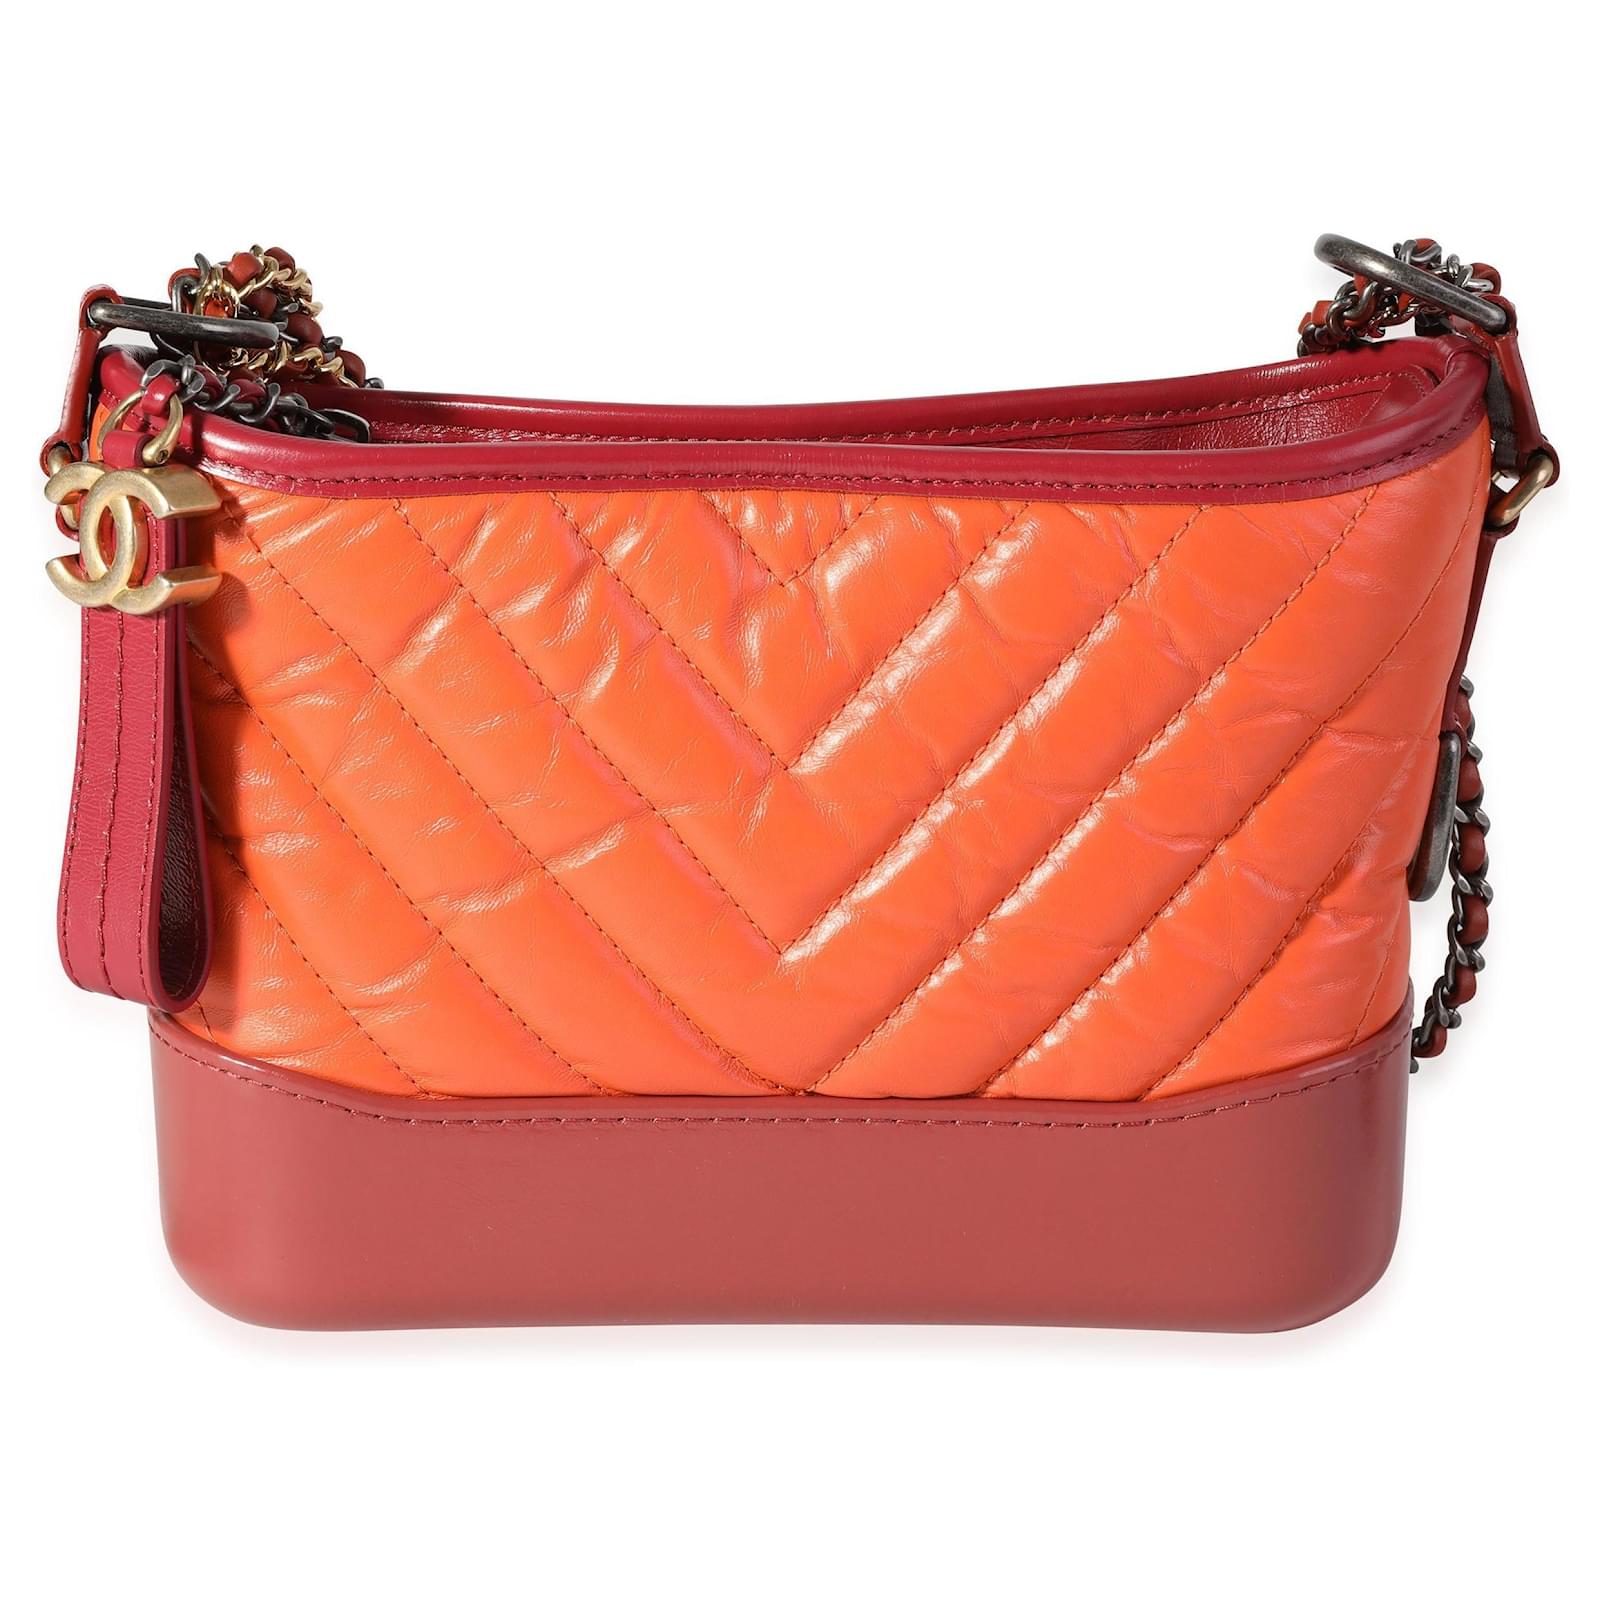 Chanel Orange & Red Aged Kalbsleder Chevron Quilted Small